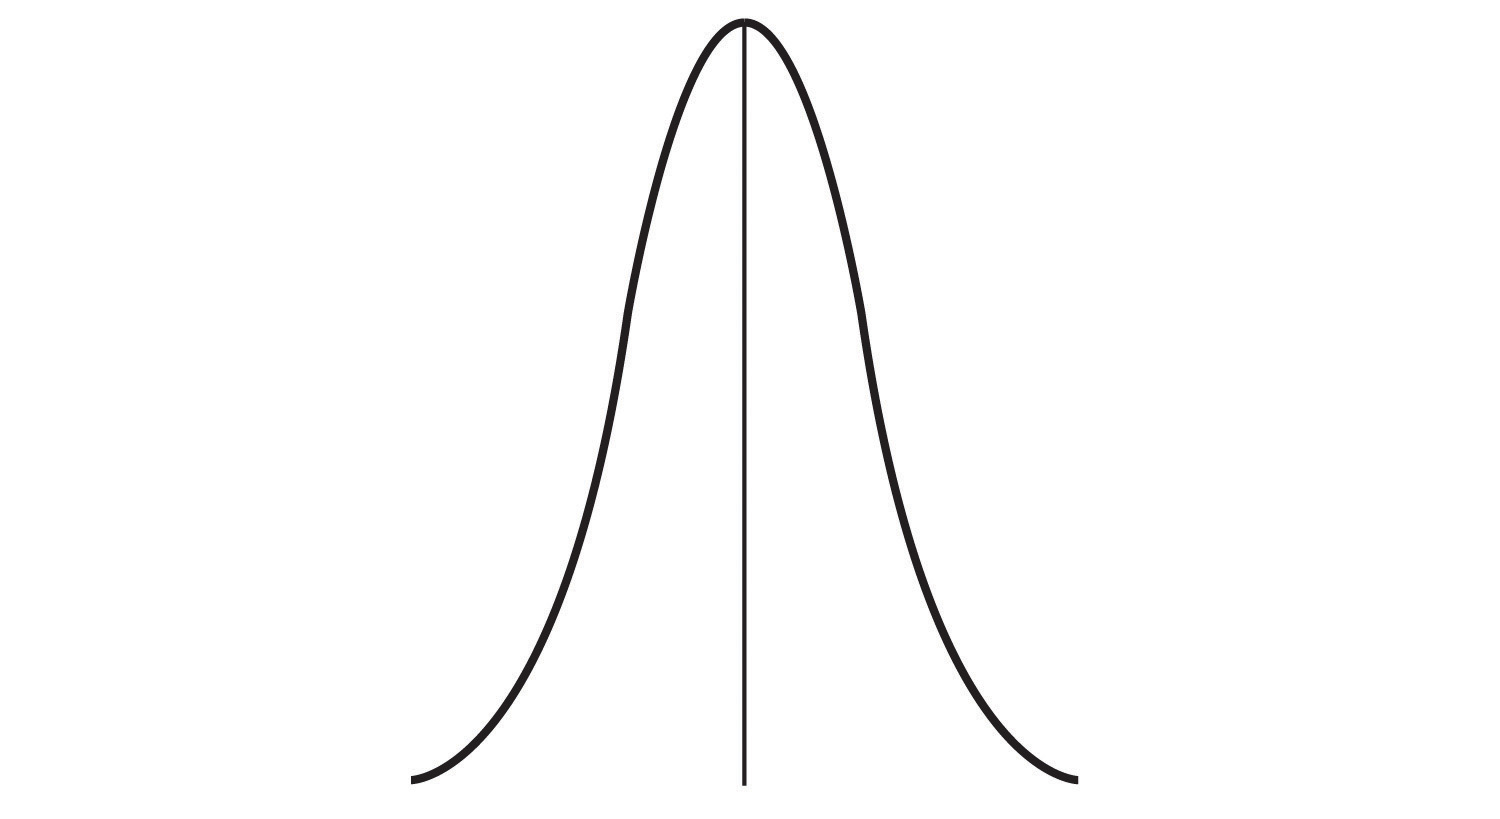 A line graph forms a narrow bell shape around the central tendency.